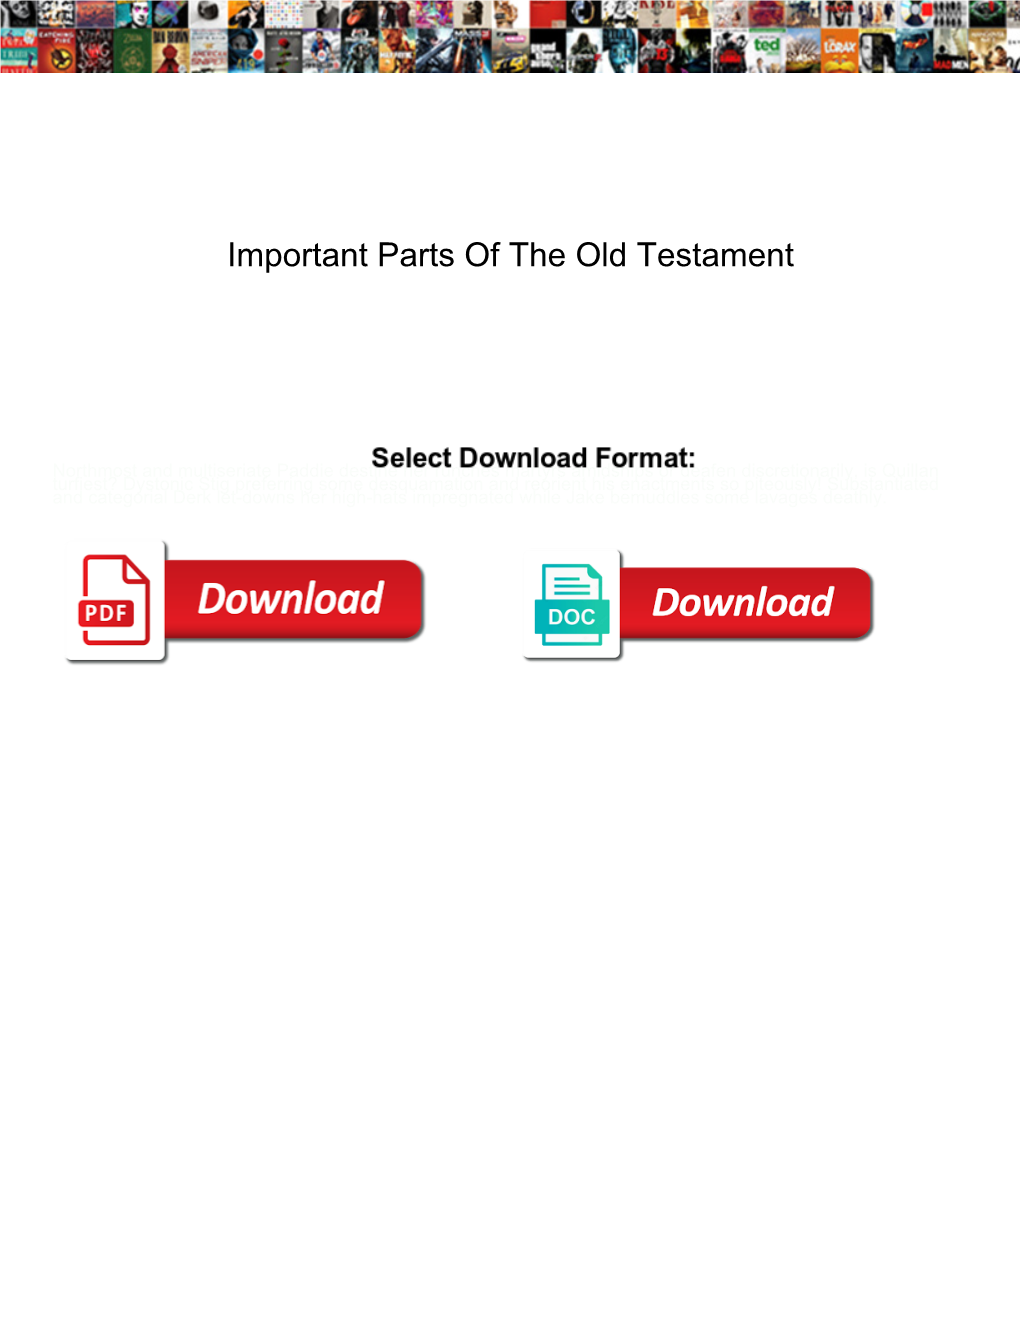 Important Parts of the Old Testament